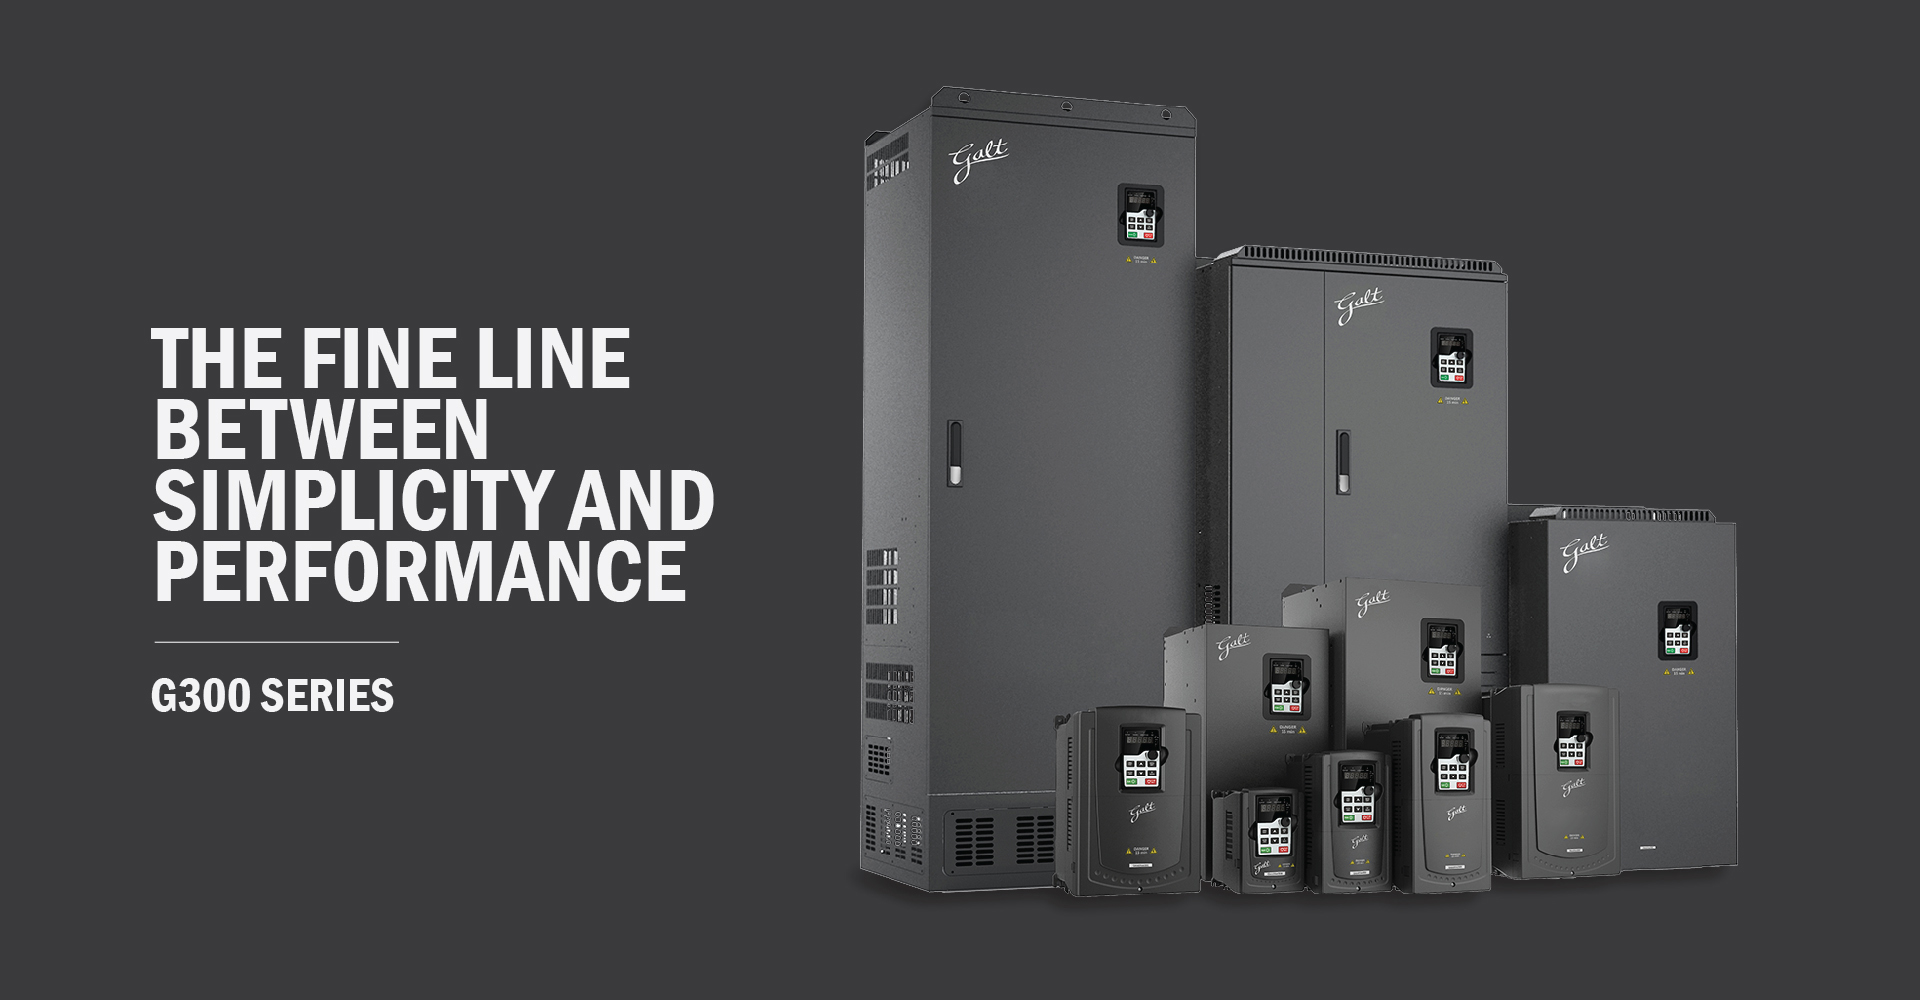 Galt G300 Series - The Fine line between simplicity and performance